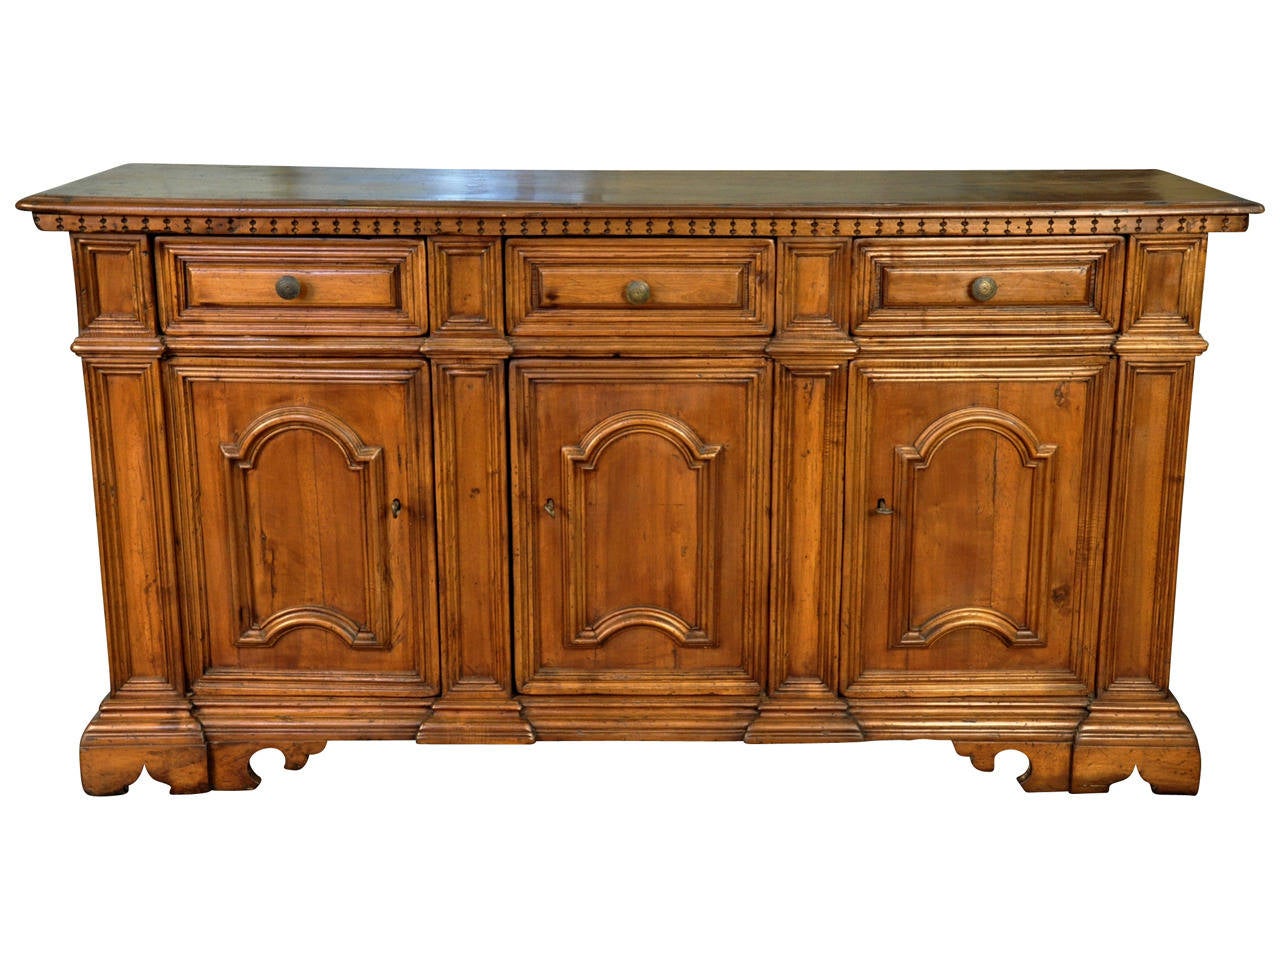 A very handsome late 19th century Credenza in walnut from Northern Italy, circa 1880.  Beautifully constructed with molded panels throughout, dentilated detail to top surface, three drawers and three doors.  A wonderful storage pieces that will